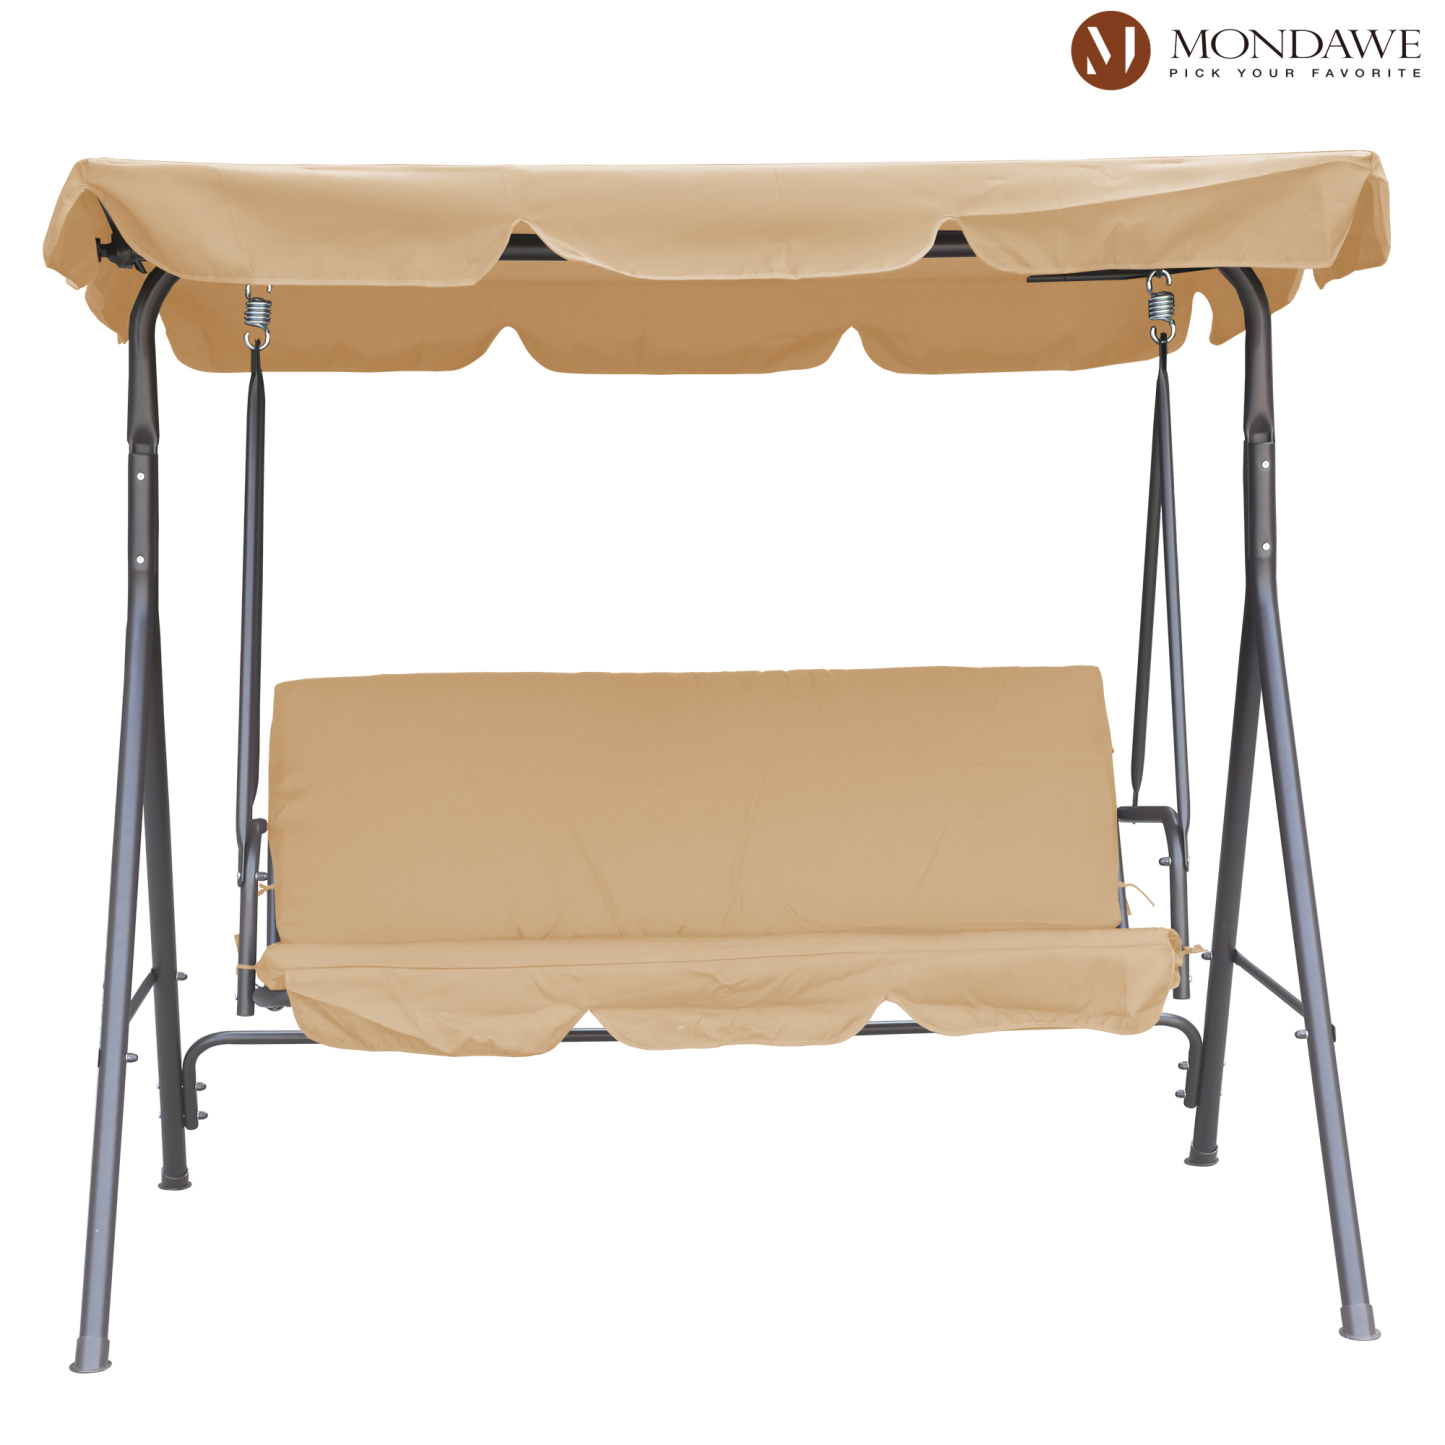 Mondawe Steel 3-Person Outdoor Canopy Swing Patio Swing Chair, Porch Swing with Removable Cushion and Convertible Canopy (Khaki/Brown)-Mondawe